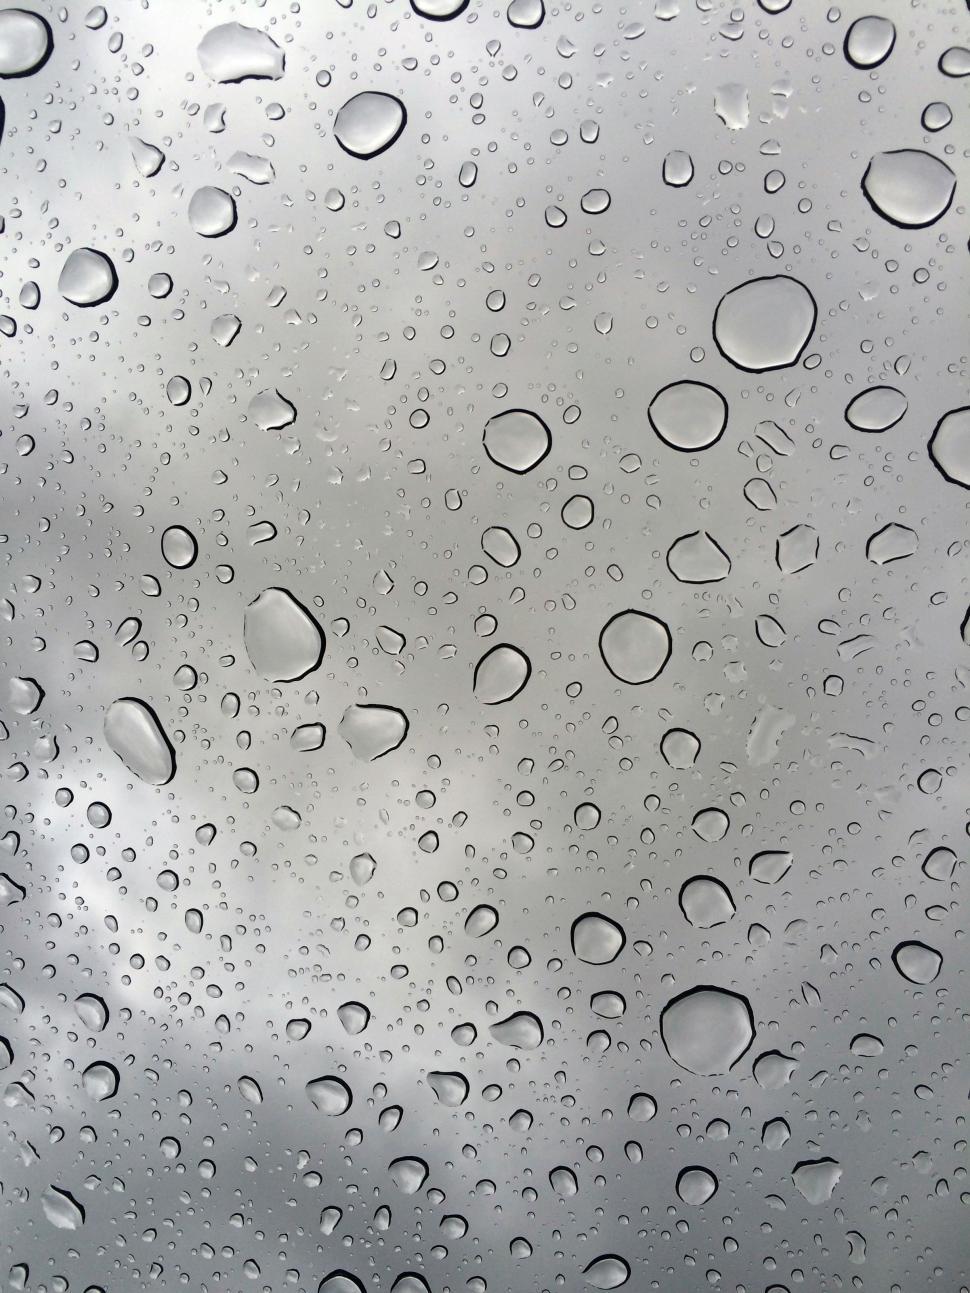 Free Image of Glass and Water-drops  